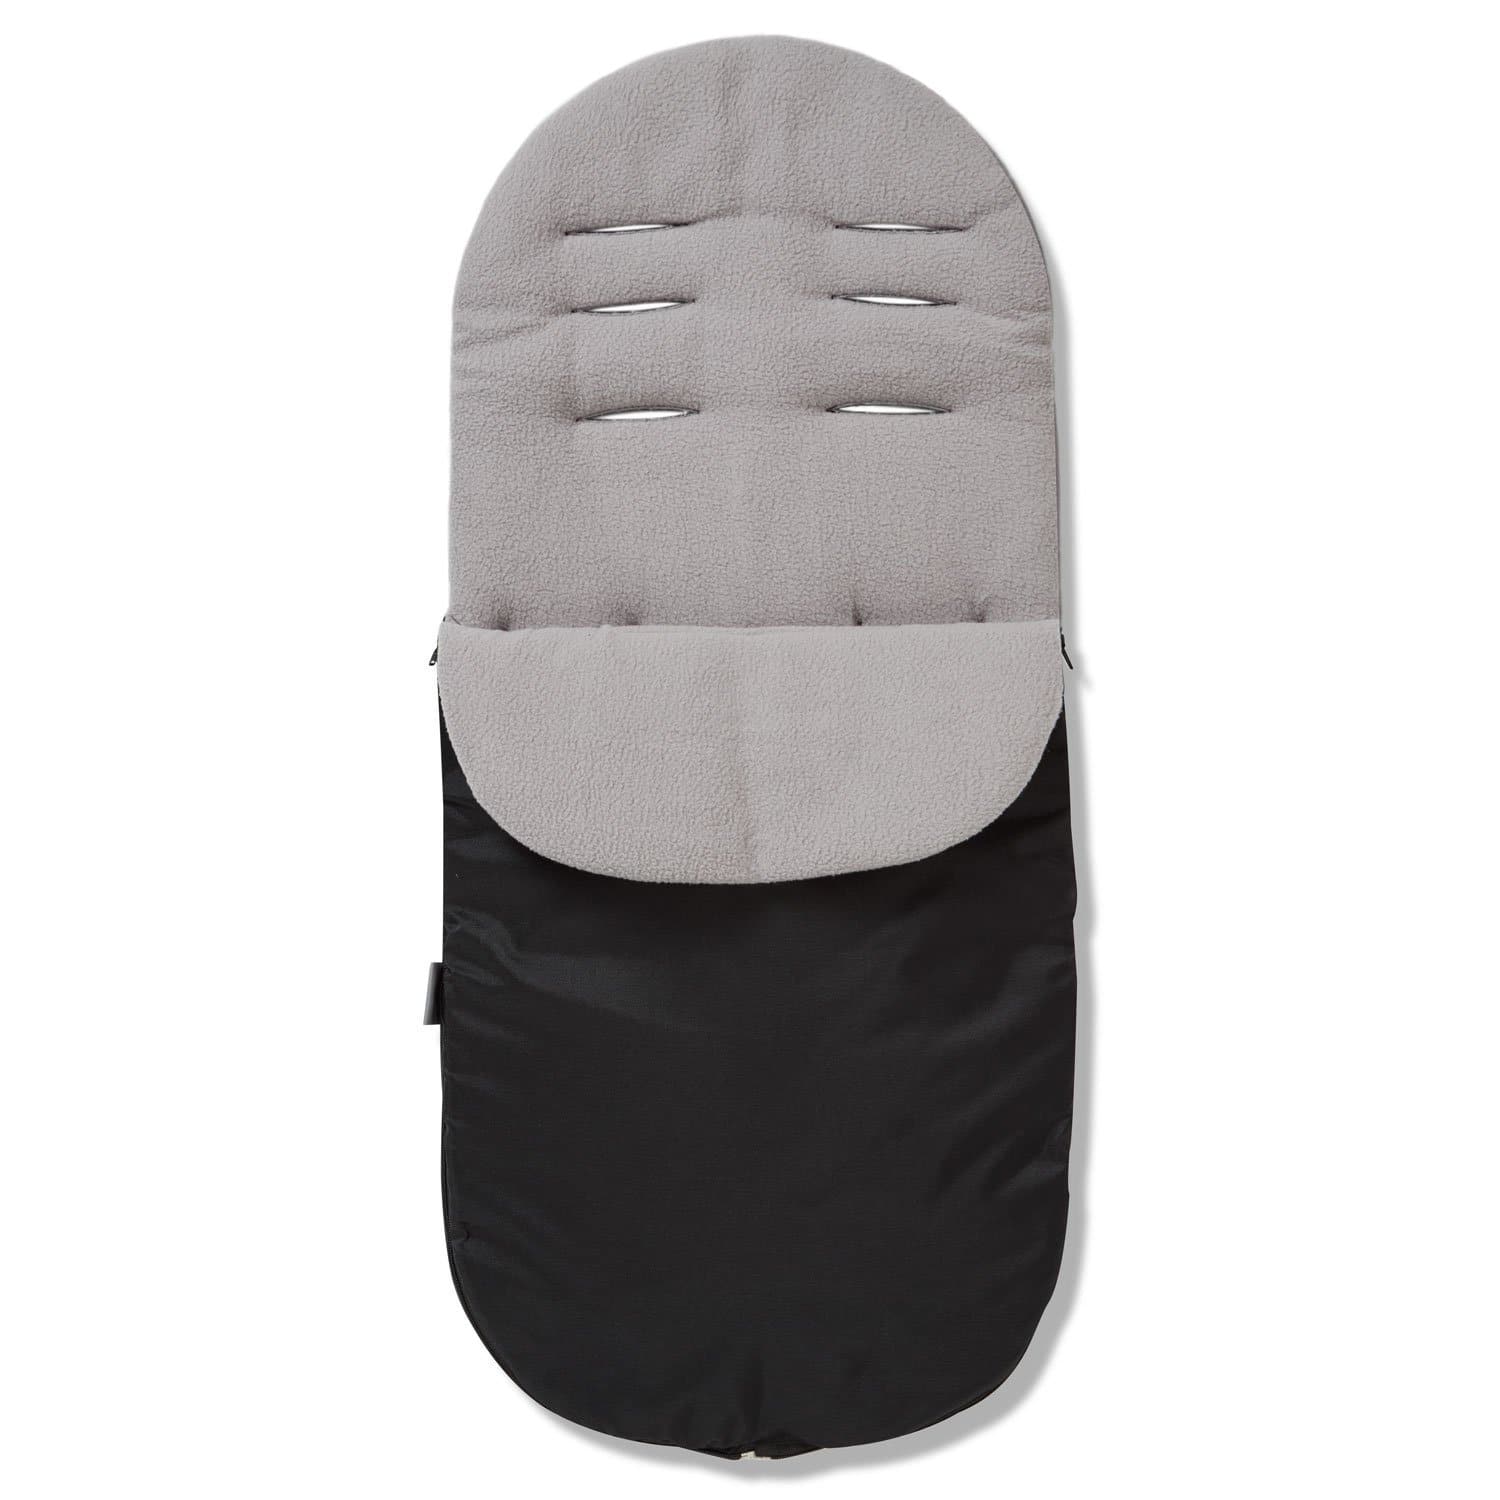 Footmuff / Cosy Toes Compatible with Baby Elegance - Grey / Fits All Models | For Your Little One